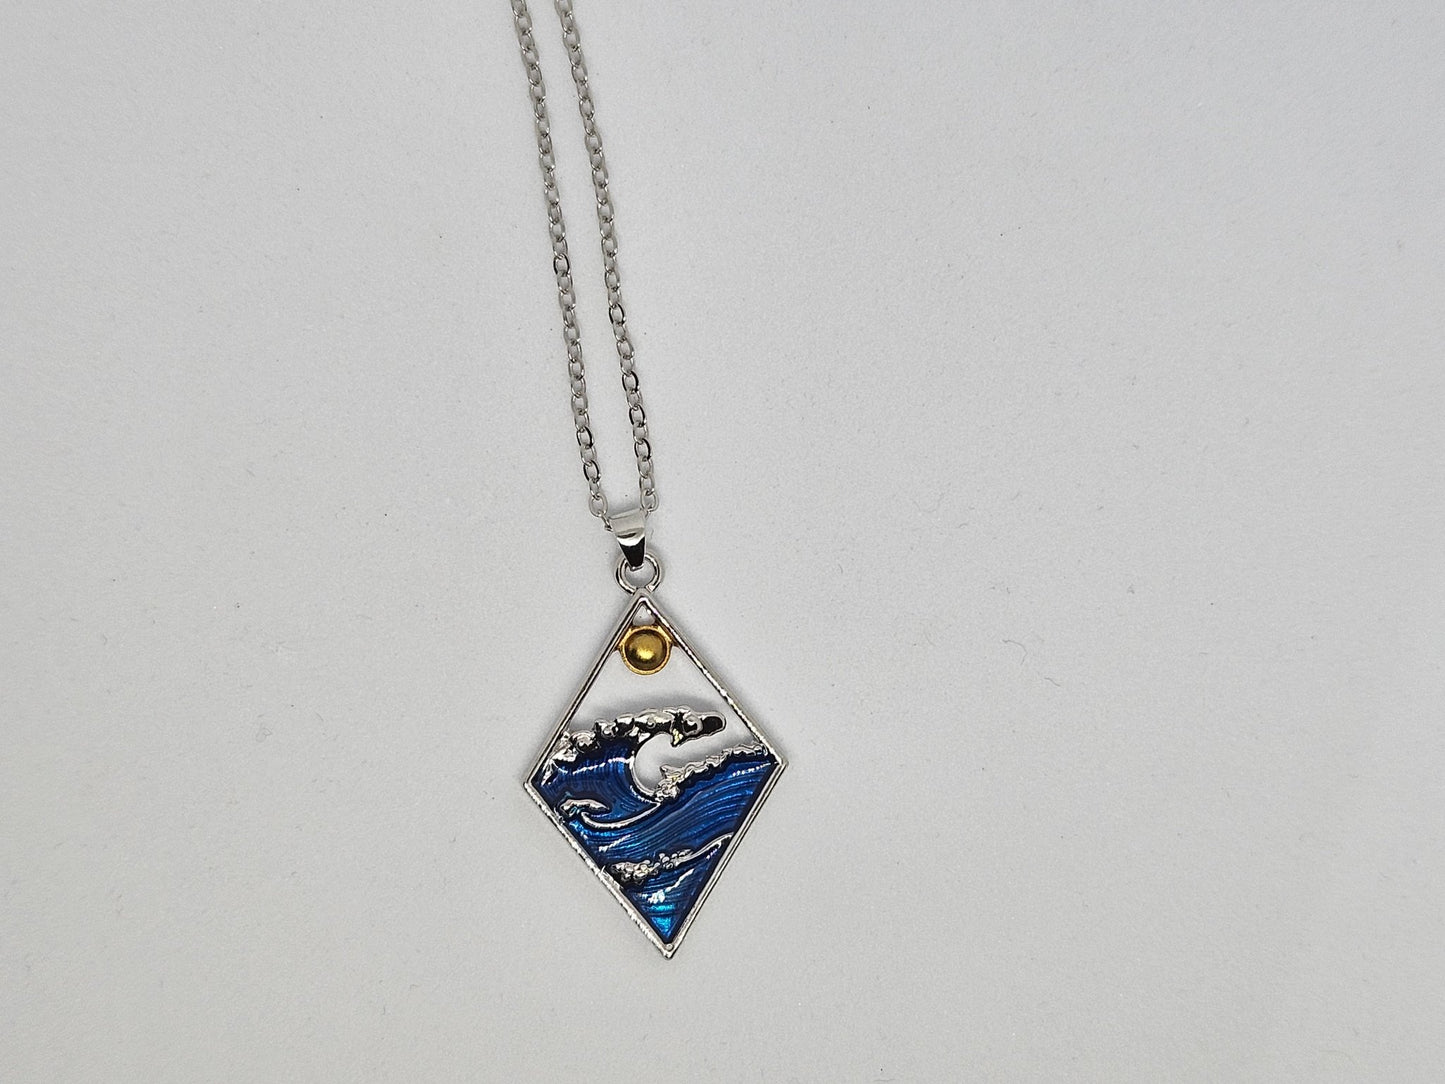 Ride the Wave necklace - Stellify